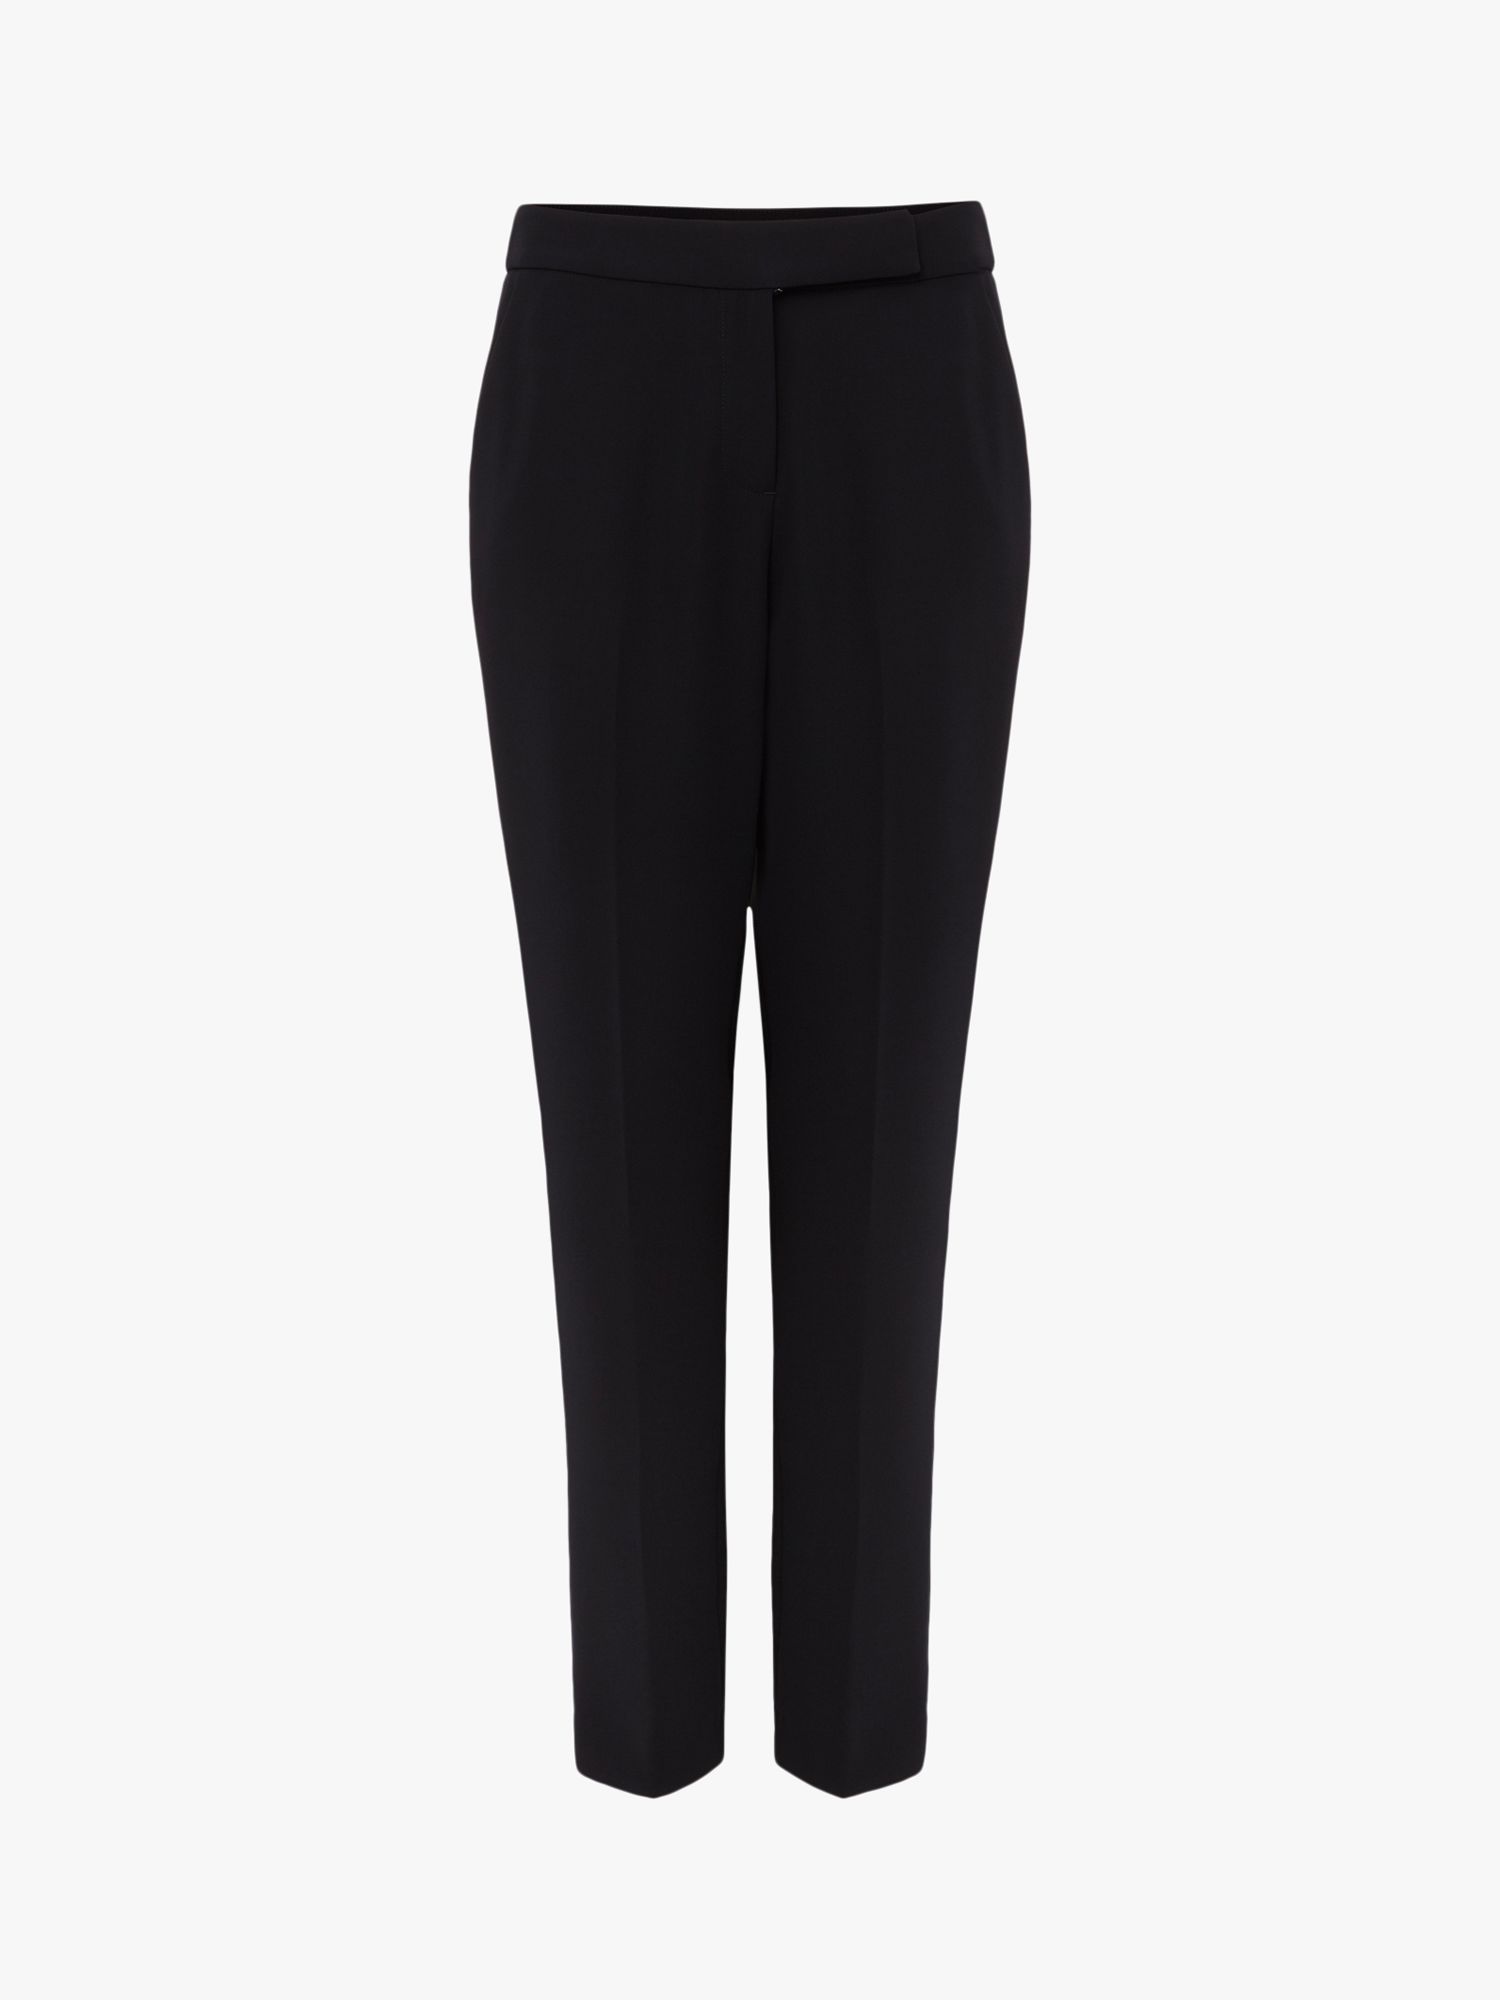 Hobbs Abigail Tapered Trousers, Navy Blue at John Lewis & Partners